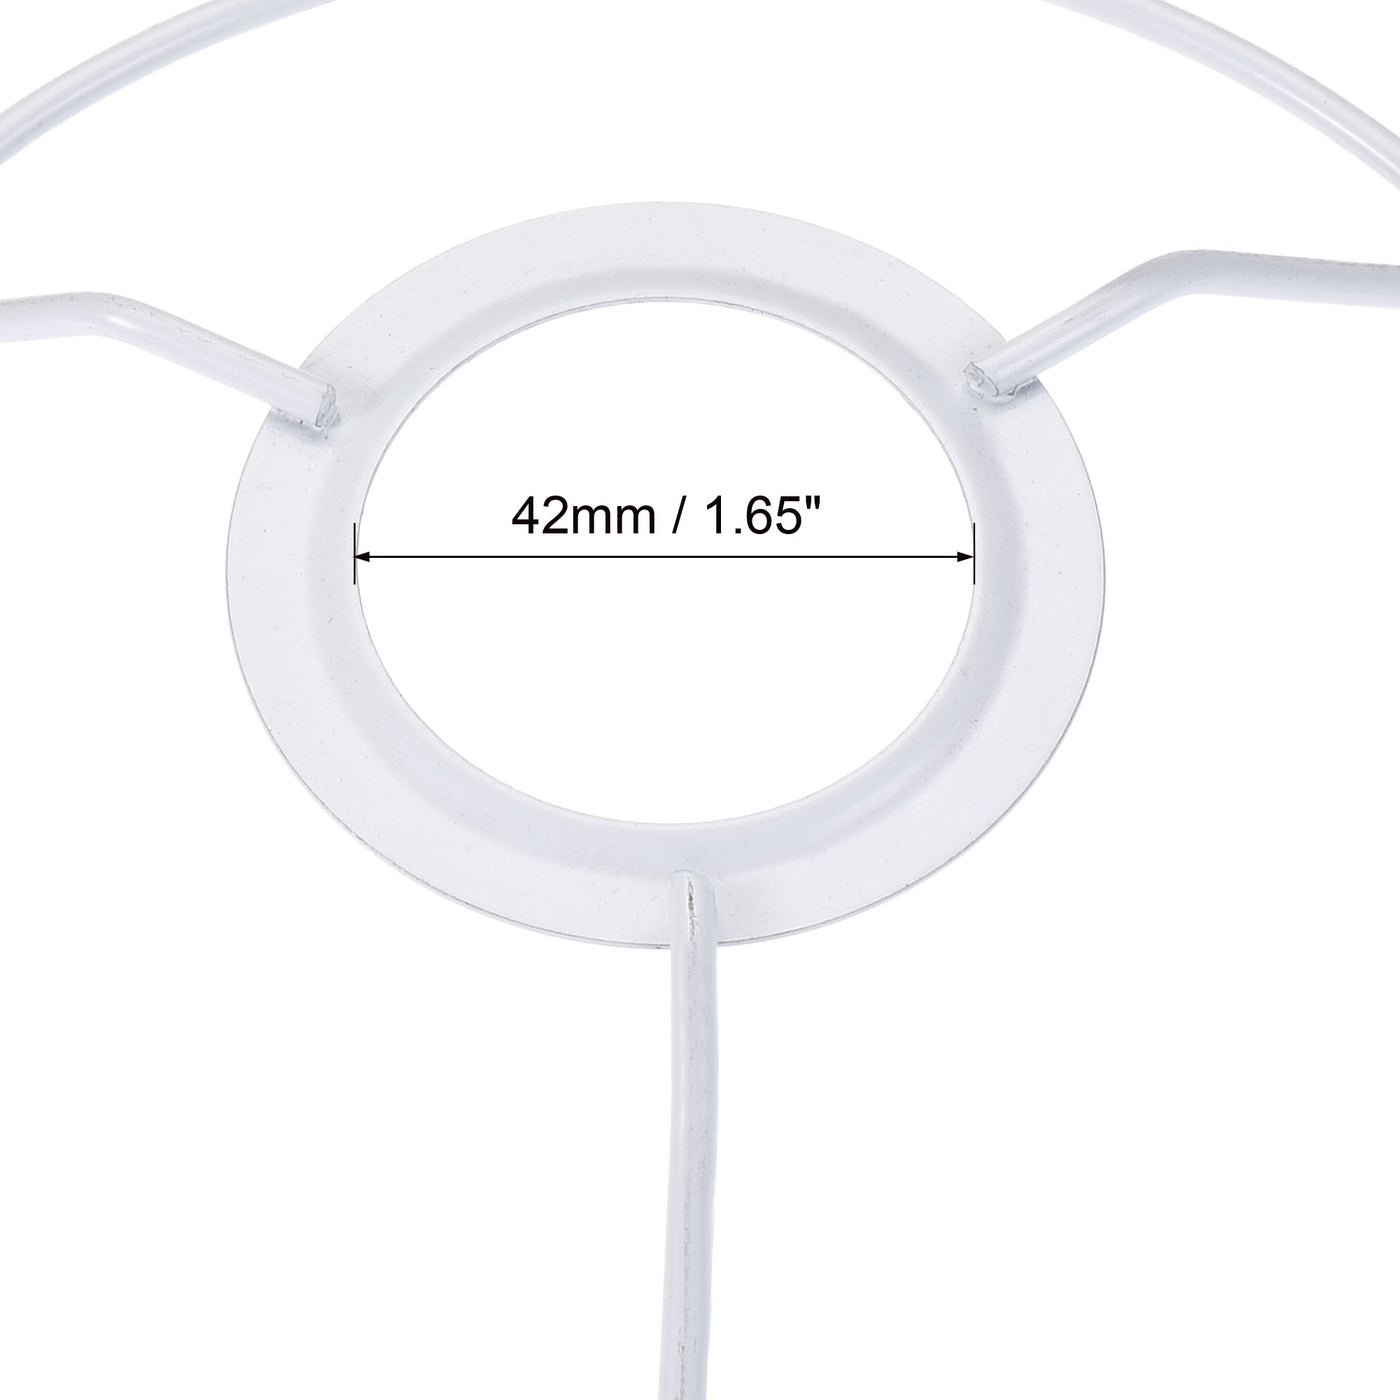 uxcell Uxcell Lamp Shade Ring, 150mm Dia. Lampshade Holder Frame Ring for E26/E27 Lamp Socket, Baked Coating Iron 1 Set